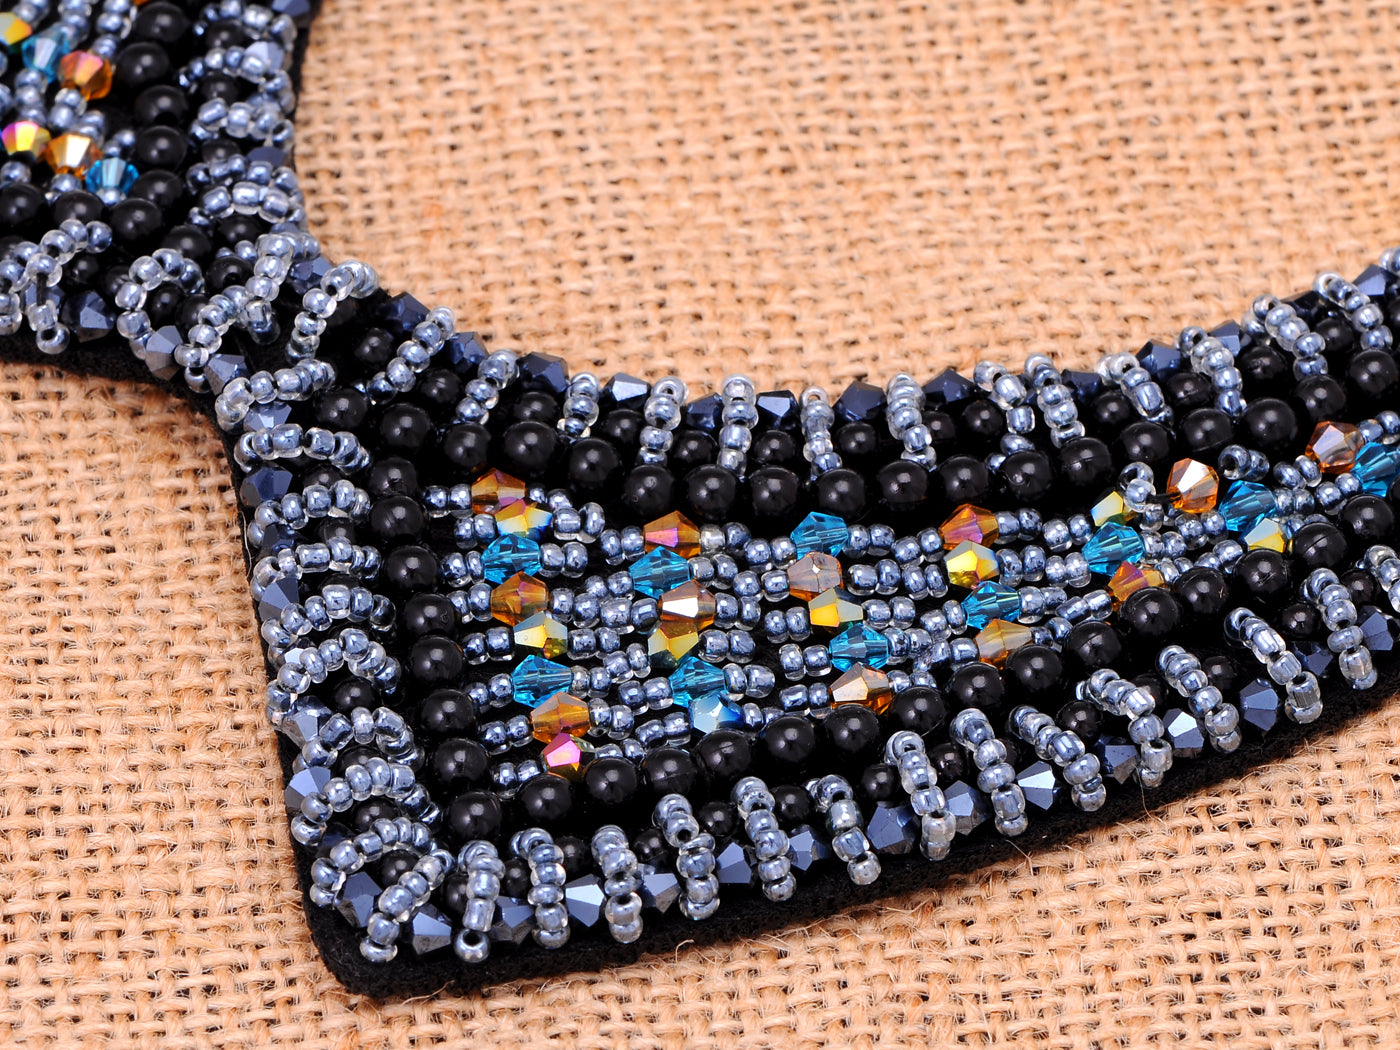 Uniquely Beaded Collar Necklace With Locking D Closure